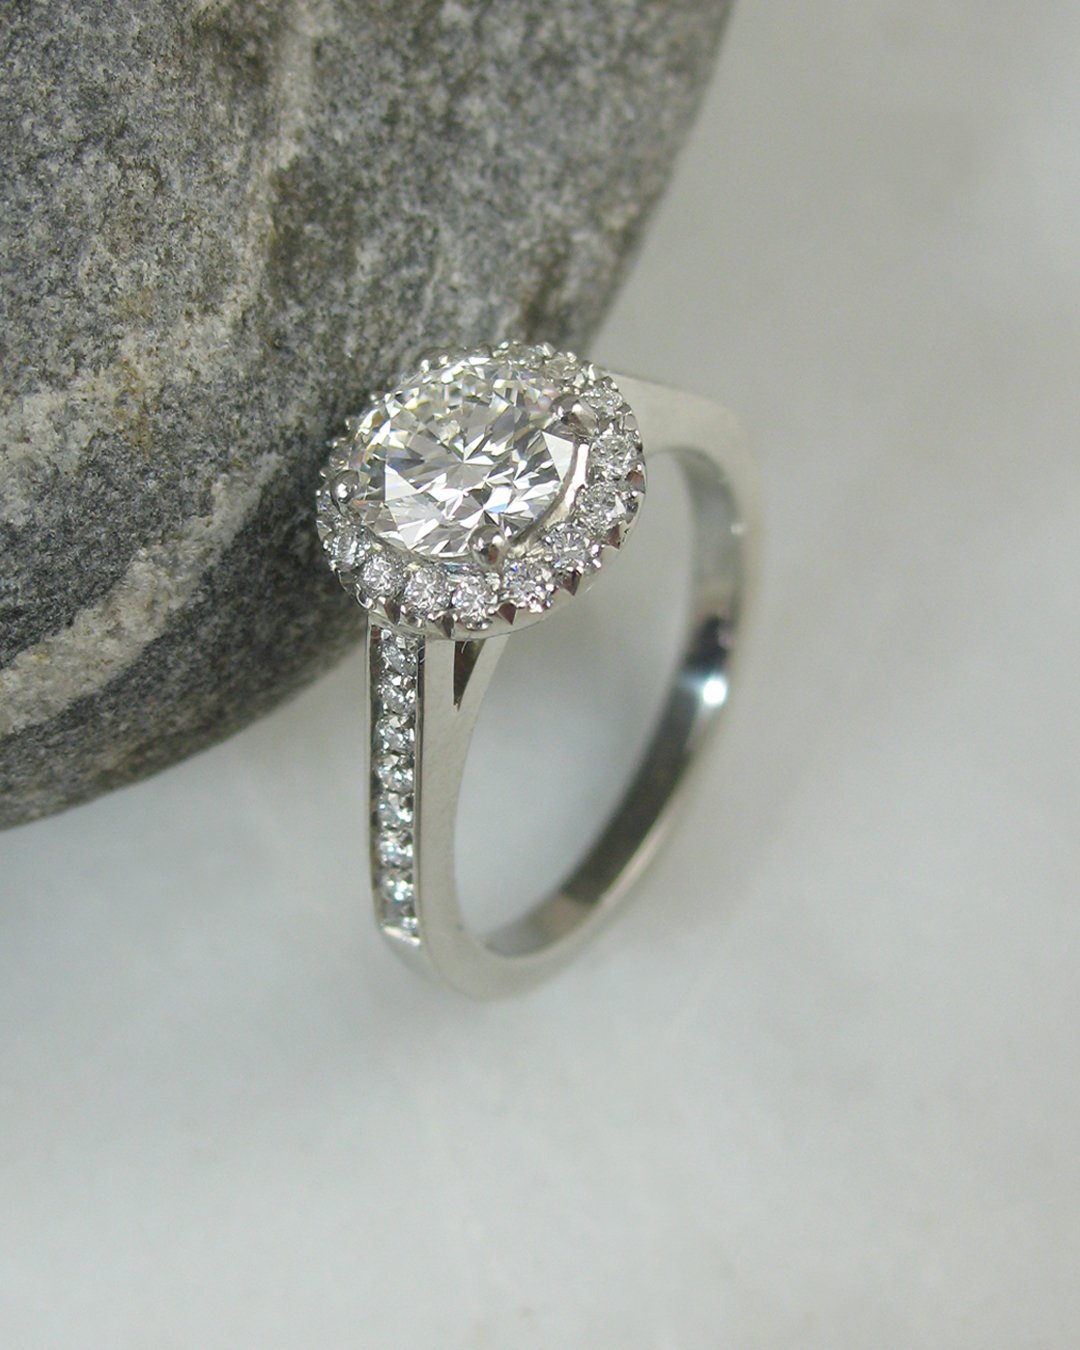 A classic dimaond halo ring